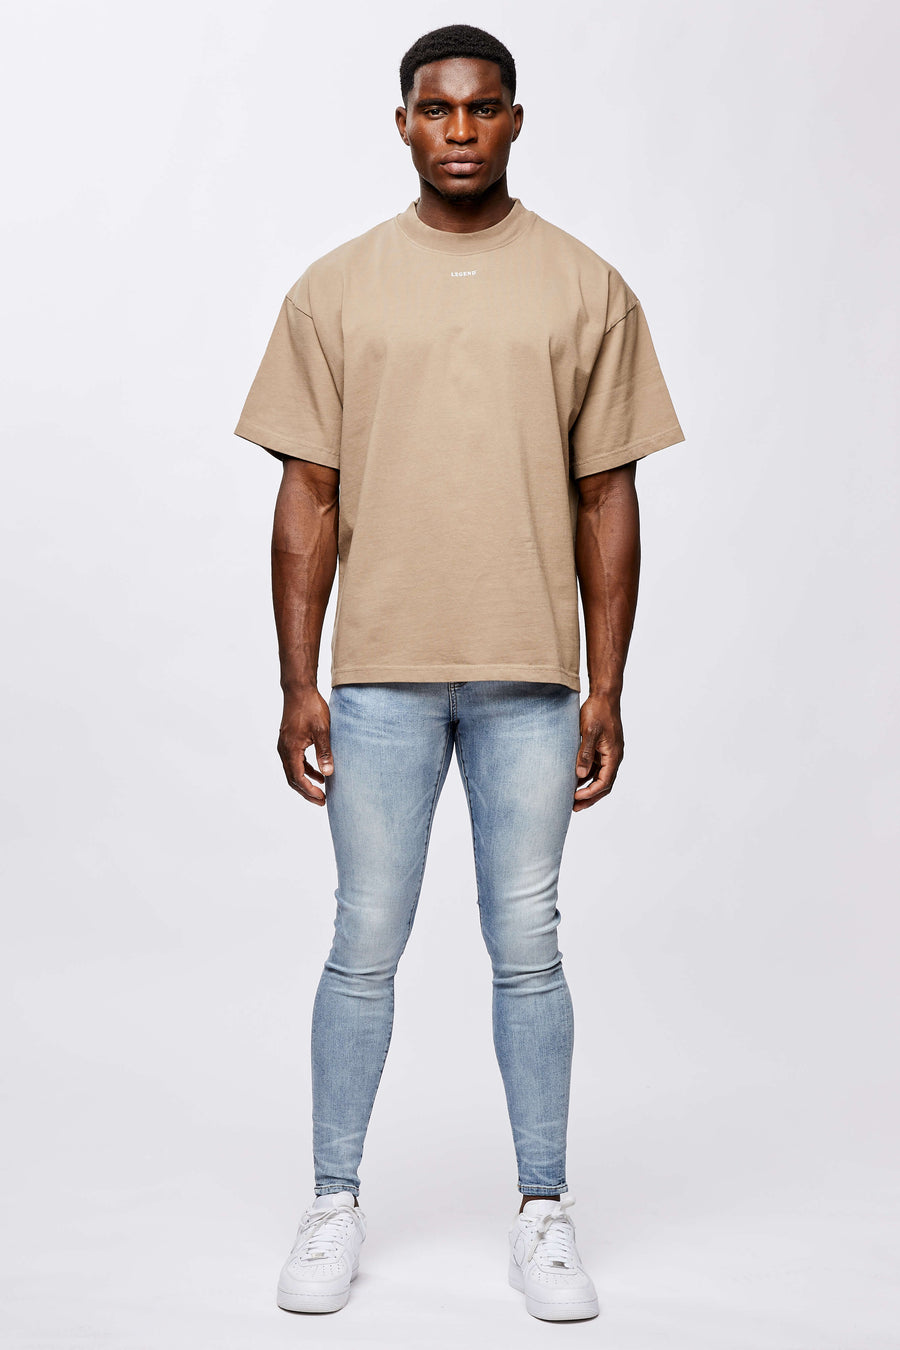 Legend London MICRO LOGO OVERSIZED T-SHIRT - TAUPE BROWN